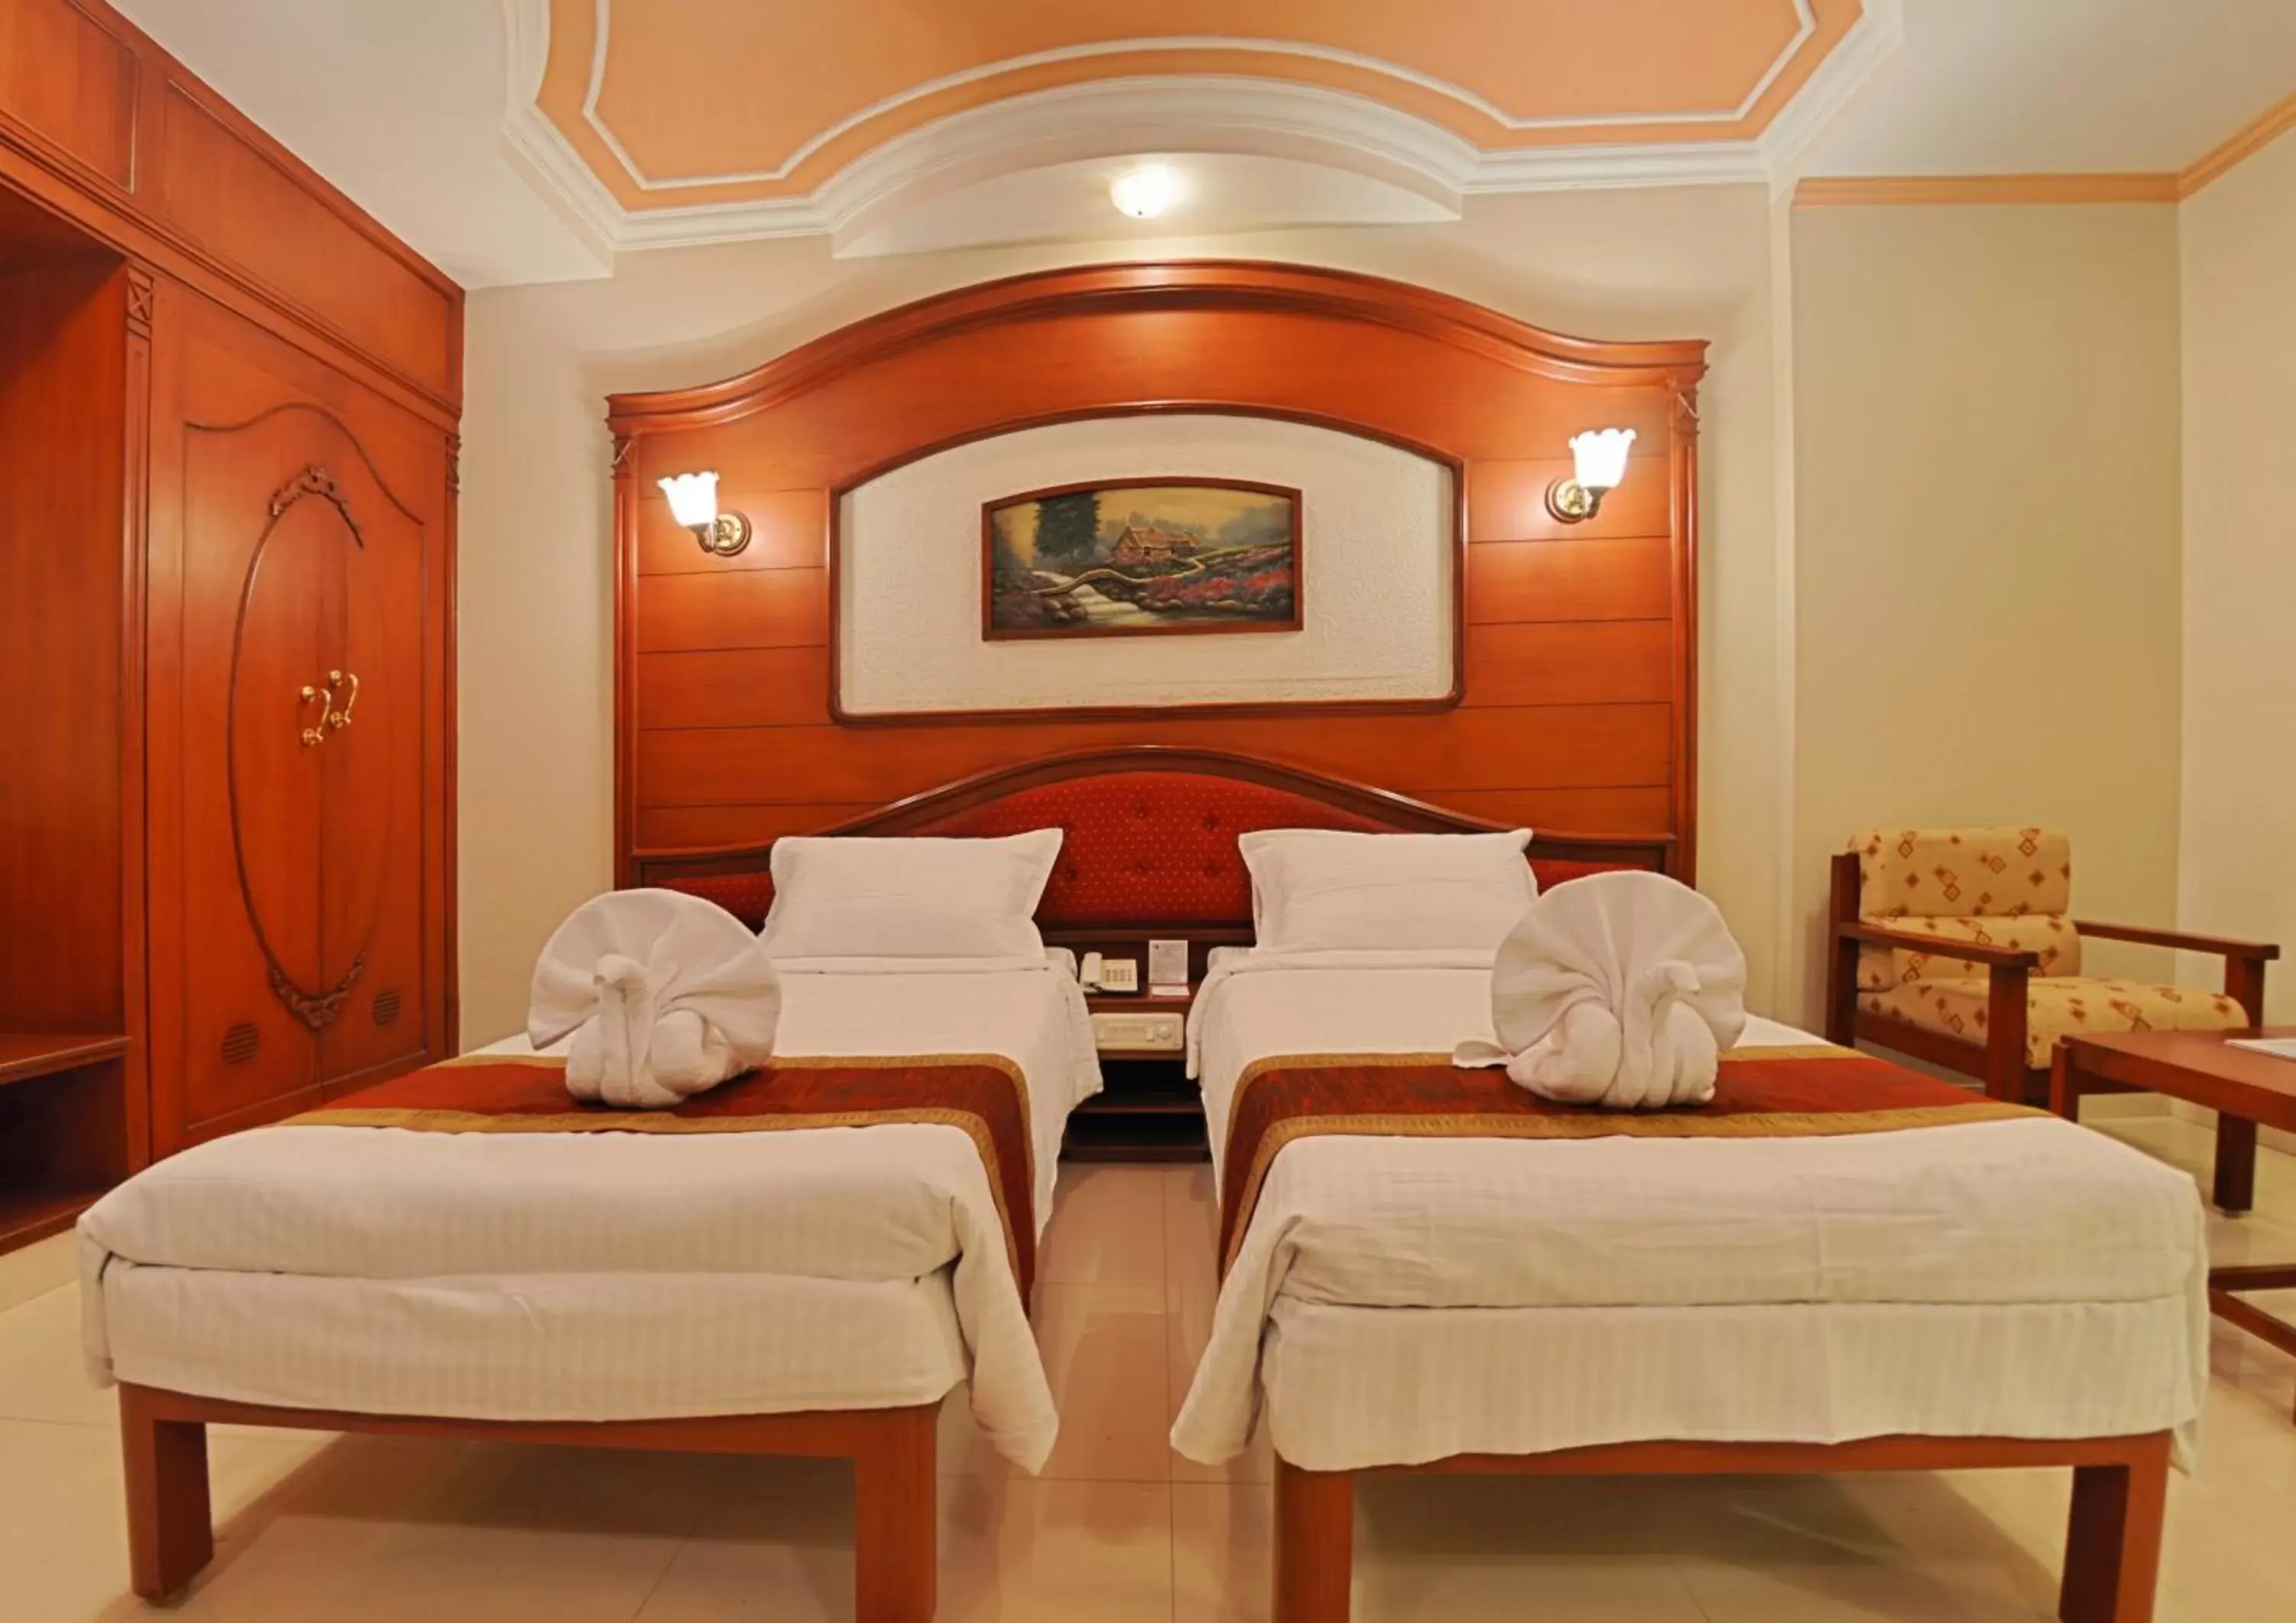 Bed in Hotel Gnanam